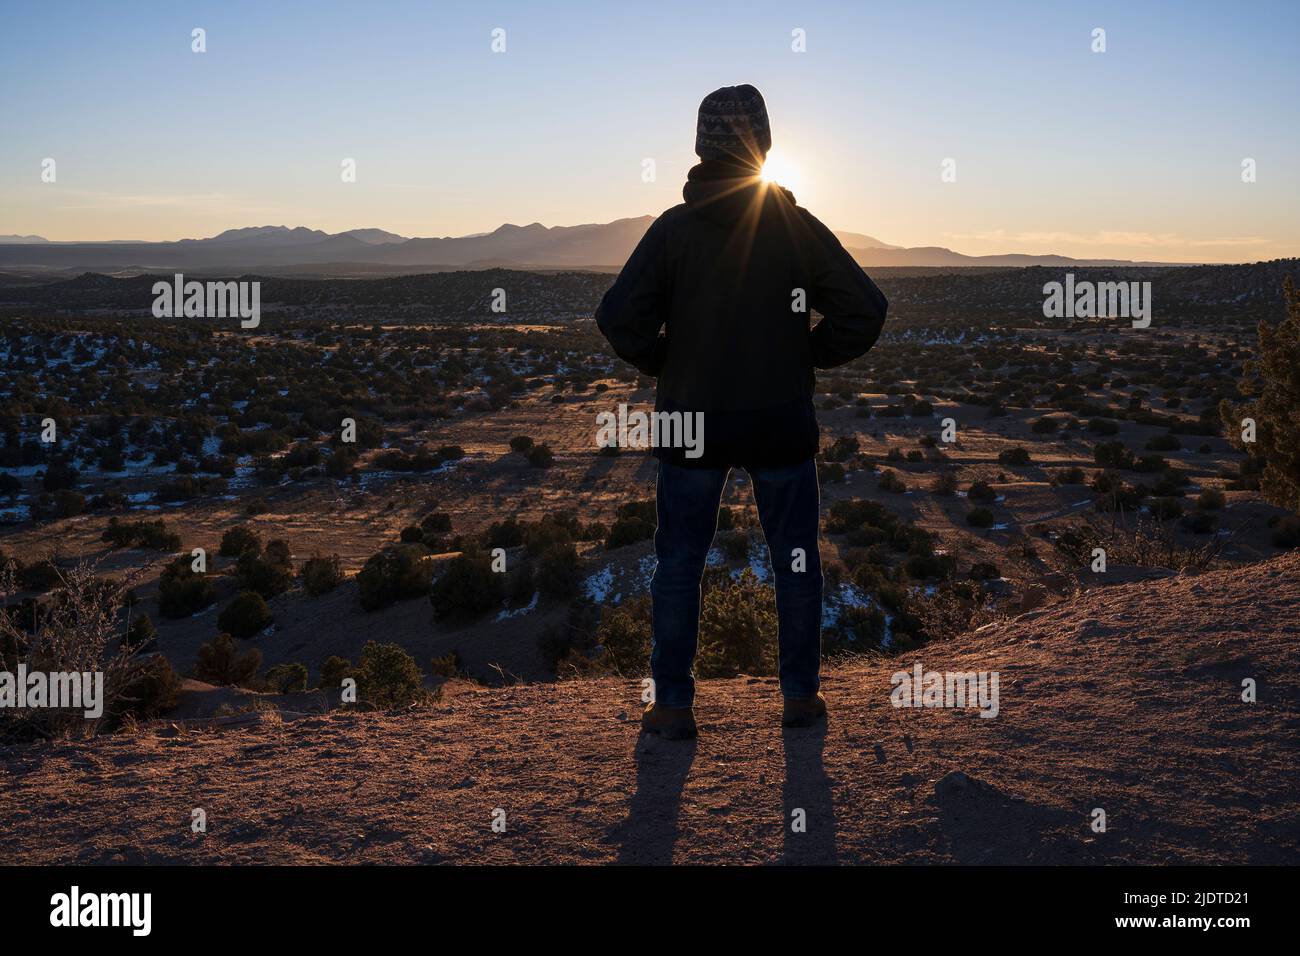 MAN LOOKING OUT OVER GALISTEO NATURE PRESERVE, LAMY, NM, USA Stock Photo